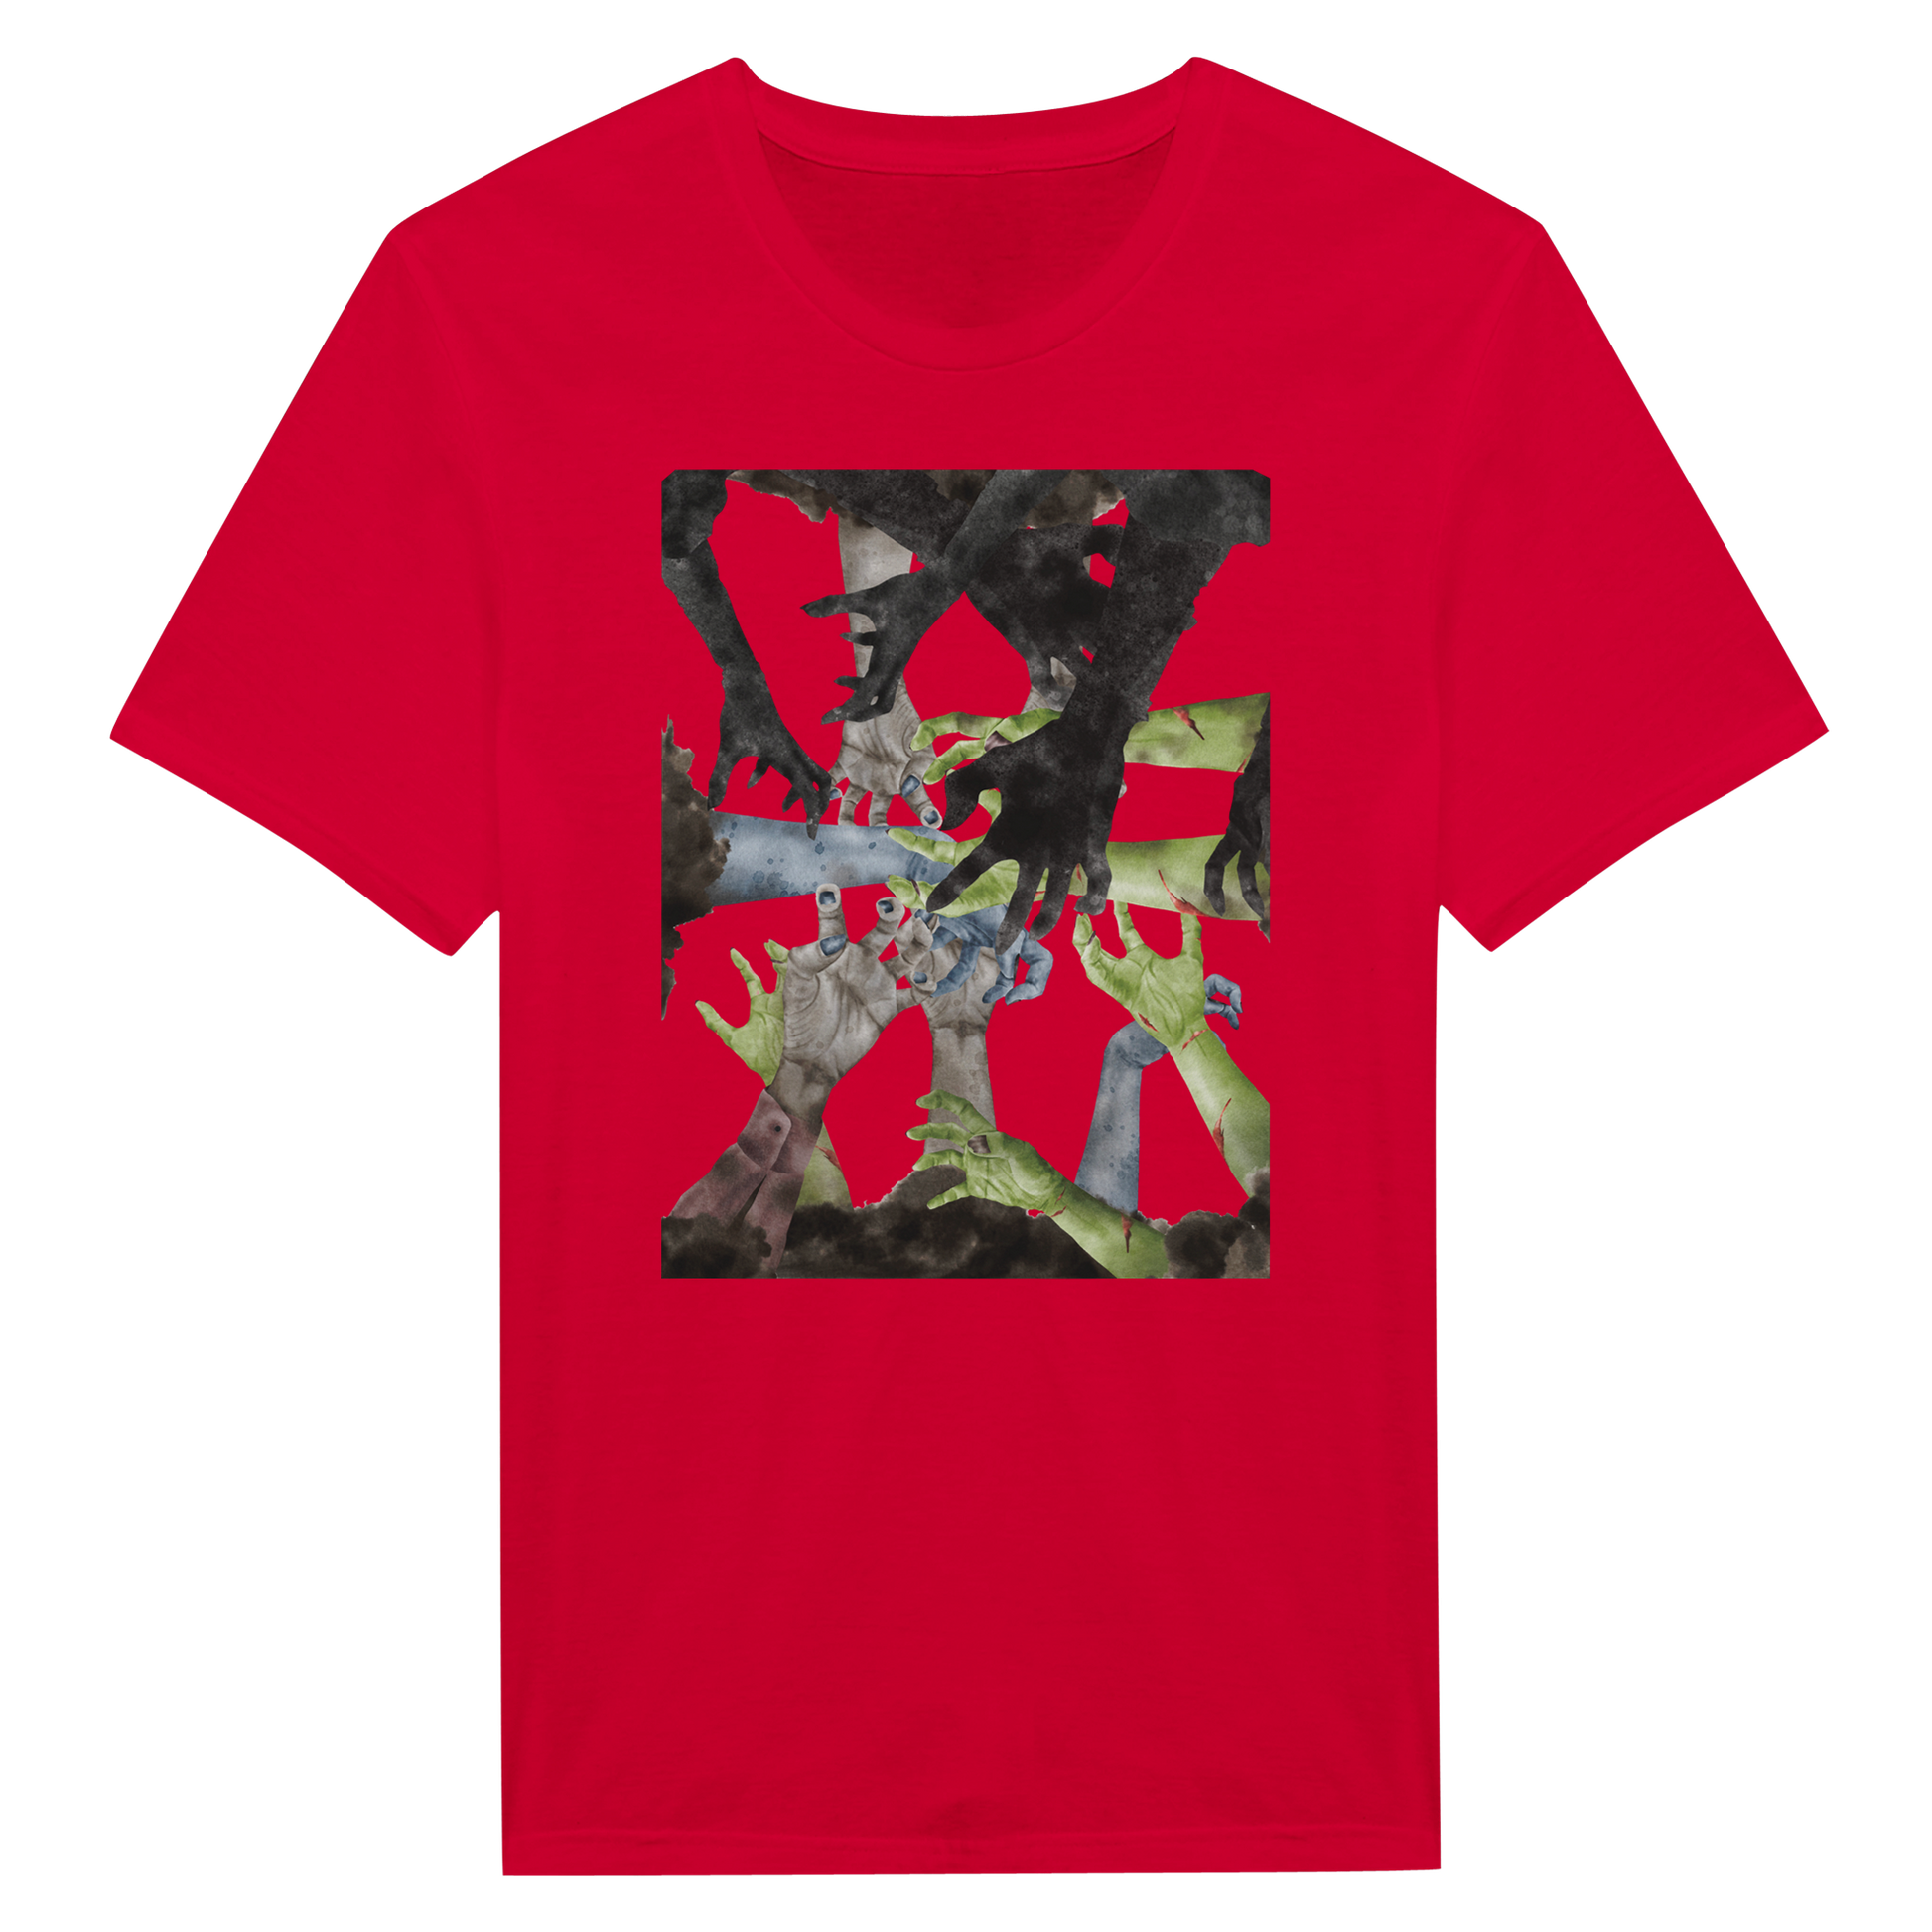 Red Tee Shirt with zombie hands reaching in the center.